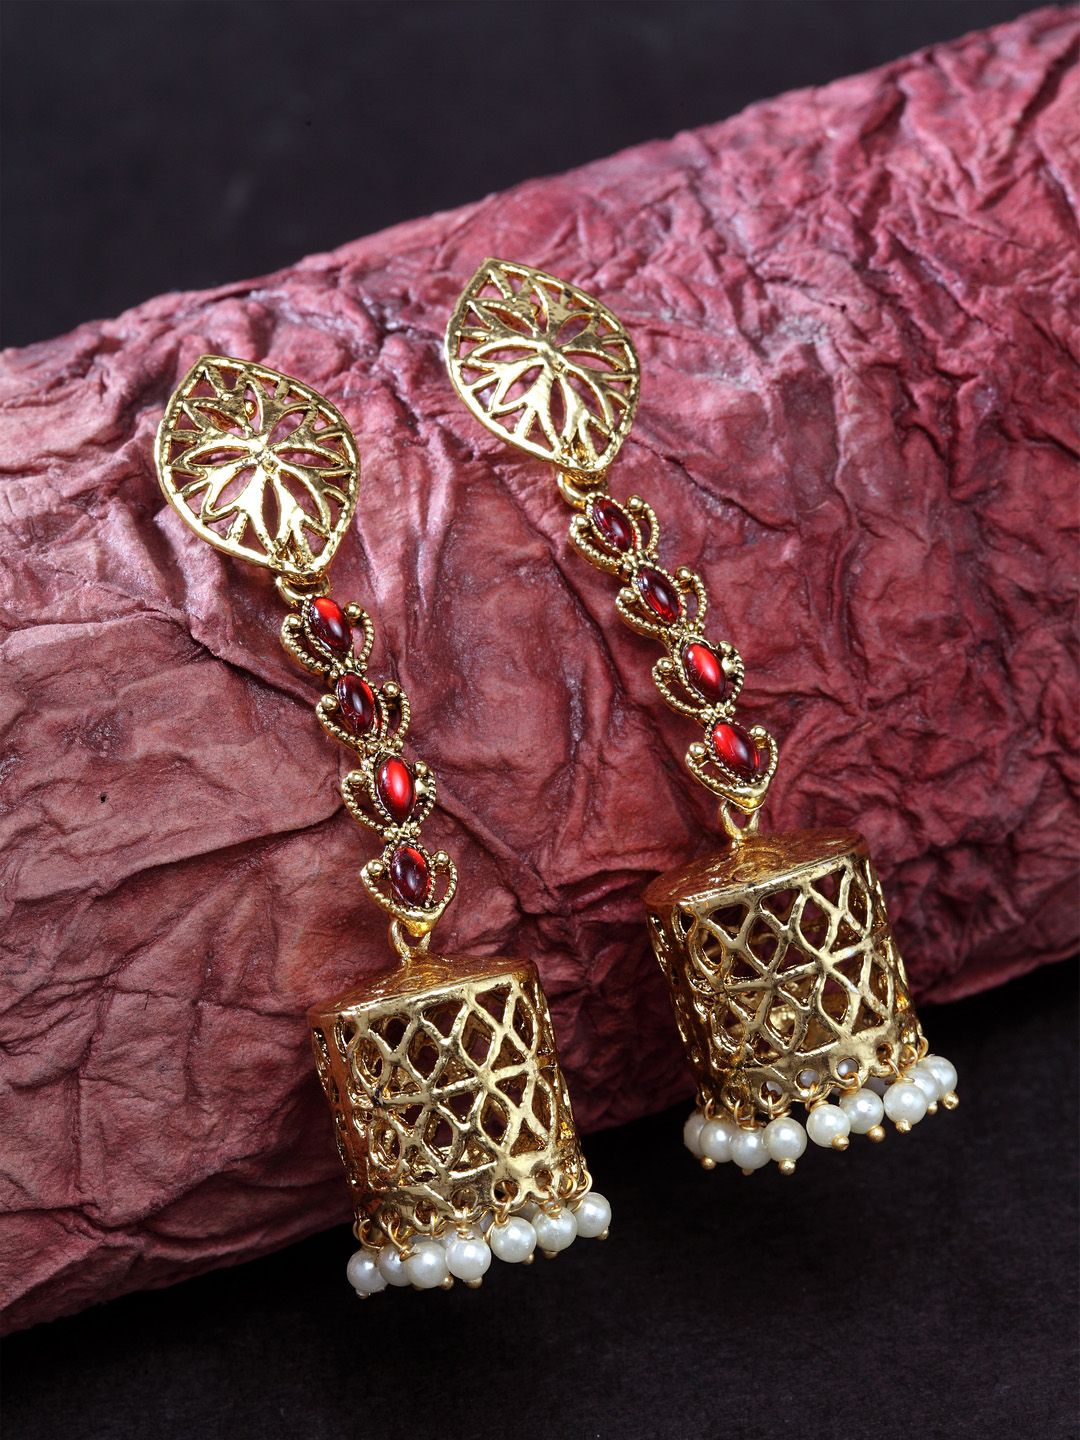 Priyaasi Gold-Toned Dome Shaped Jhumkas Price in India